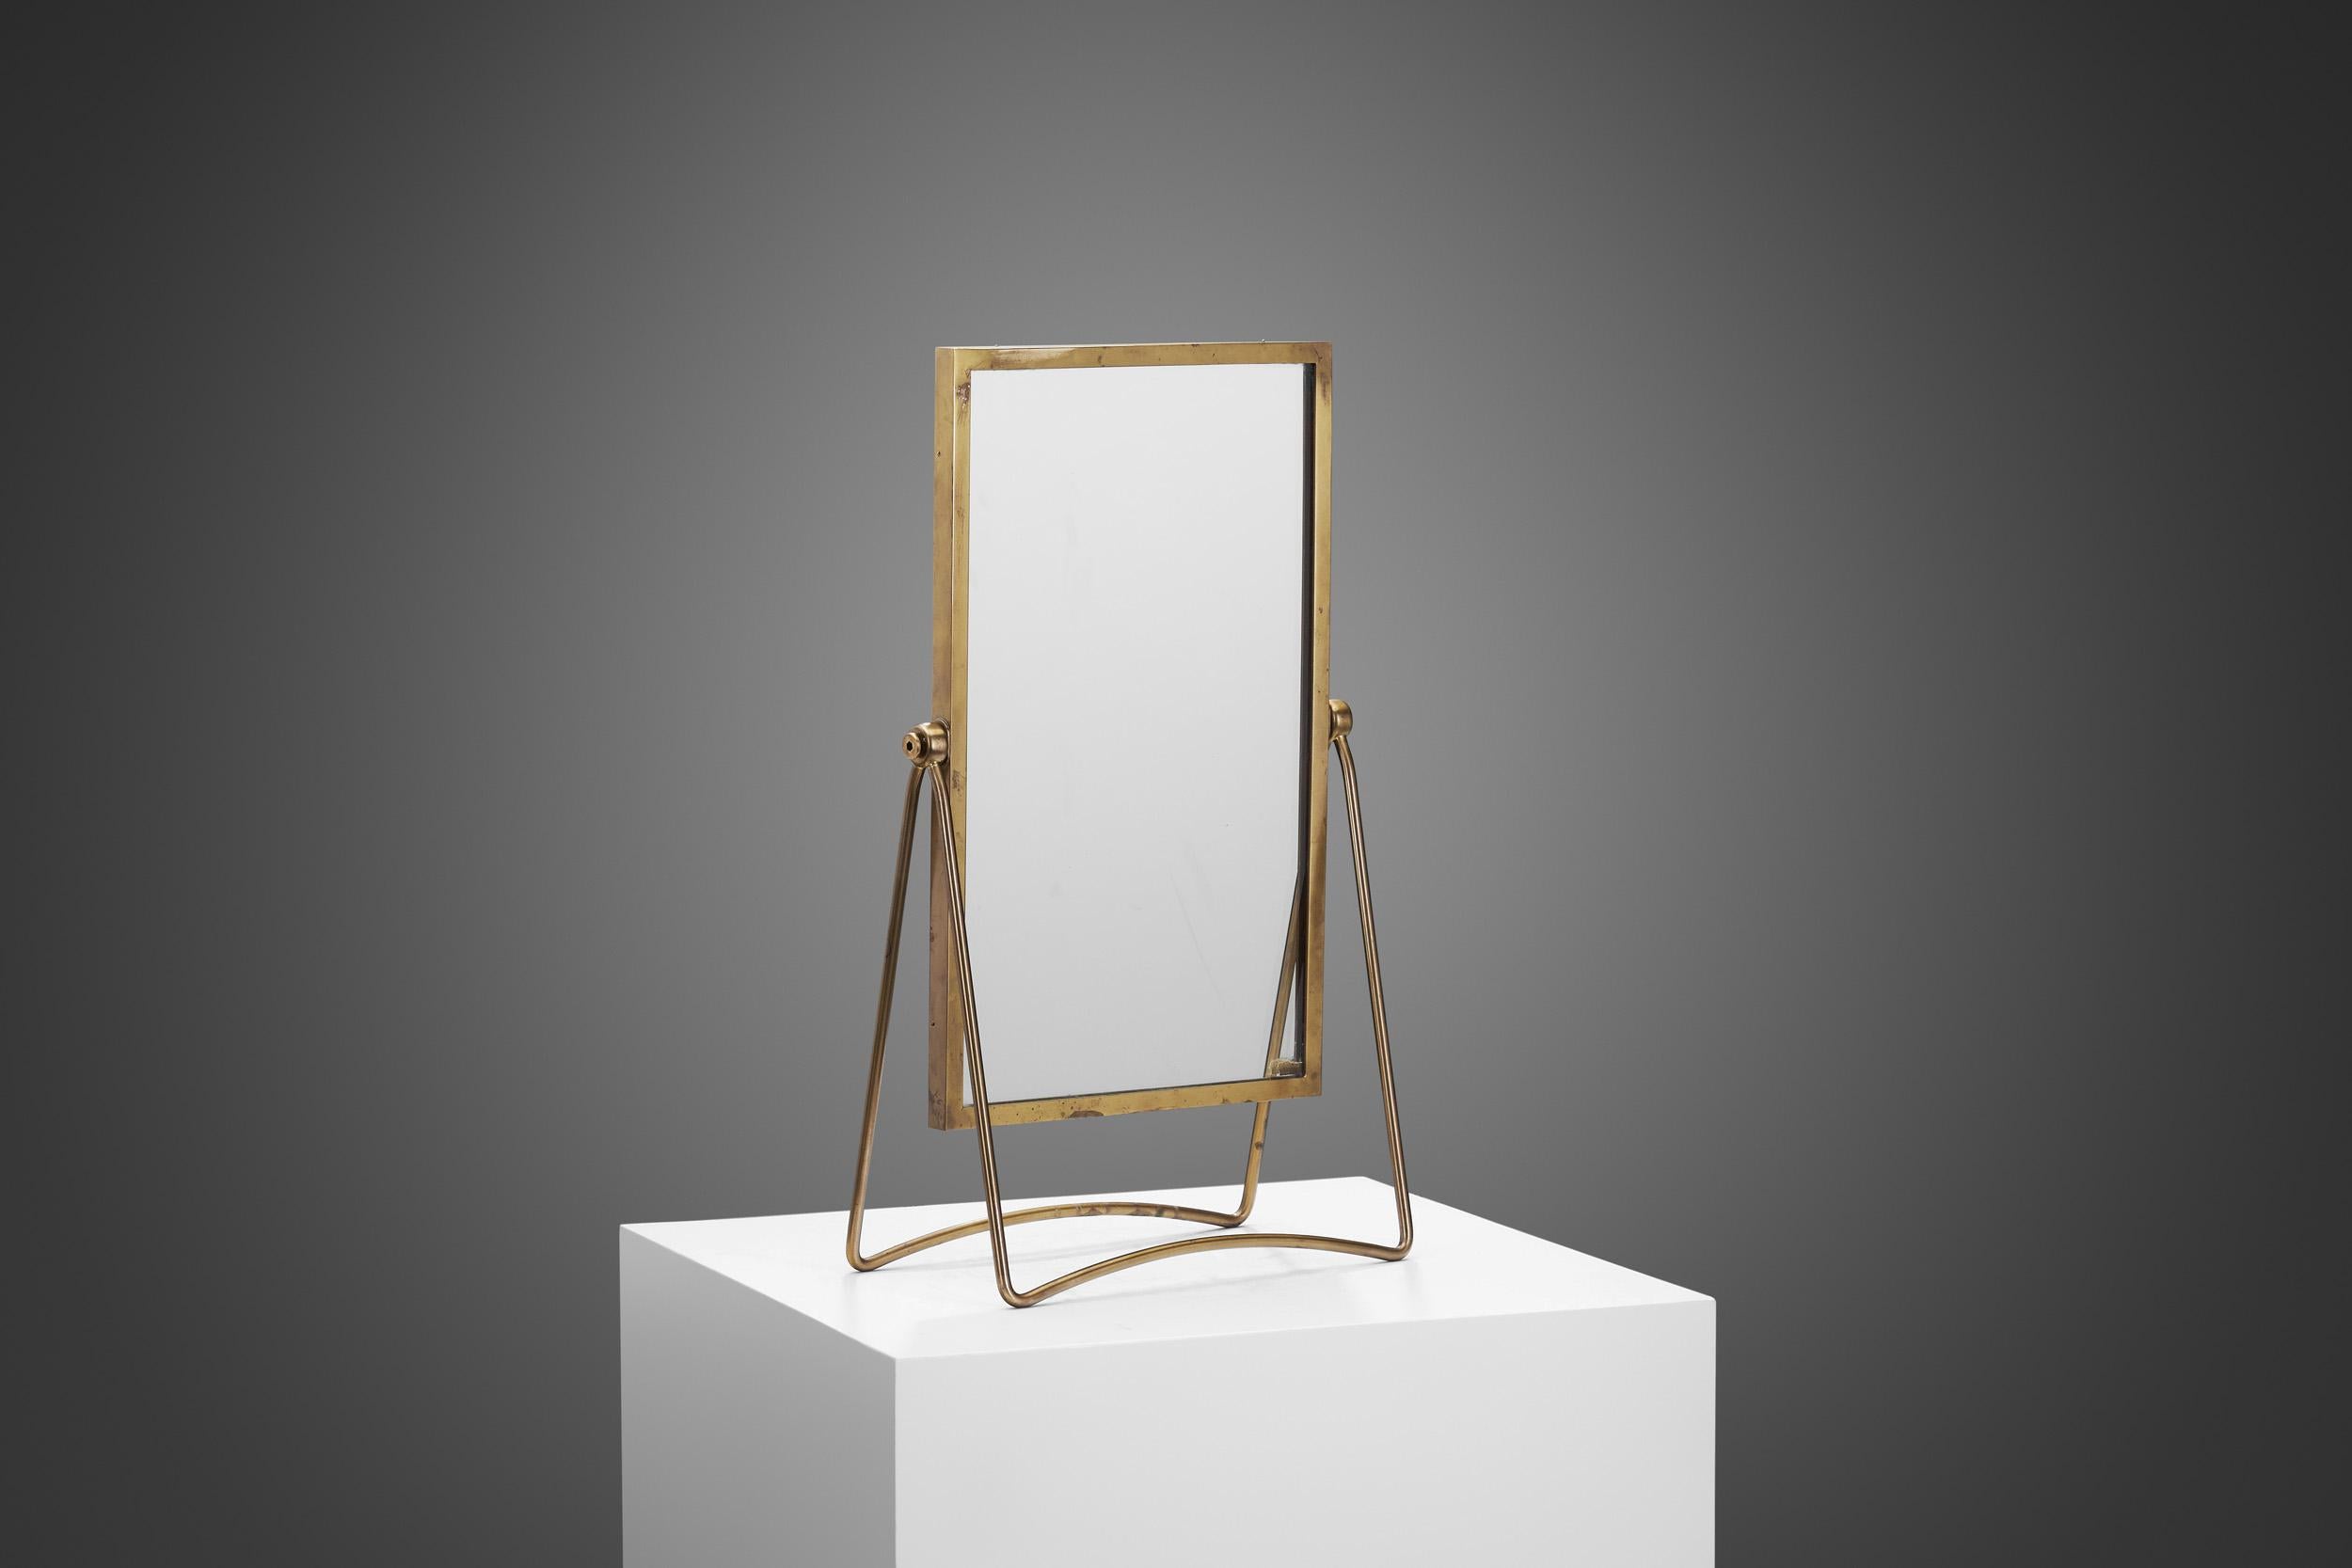 Mirrors are versatile pieces of interior décor with several functions and advantages; they create depth, increase light coverage, and add a statement to any space. Fusing function and form, table mirrors offer useful reflection while also providing